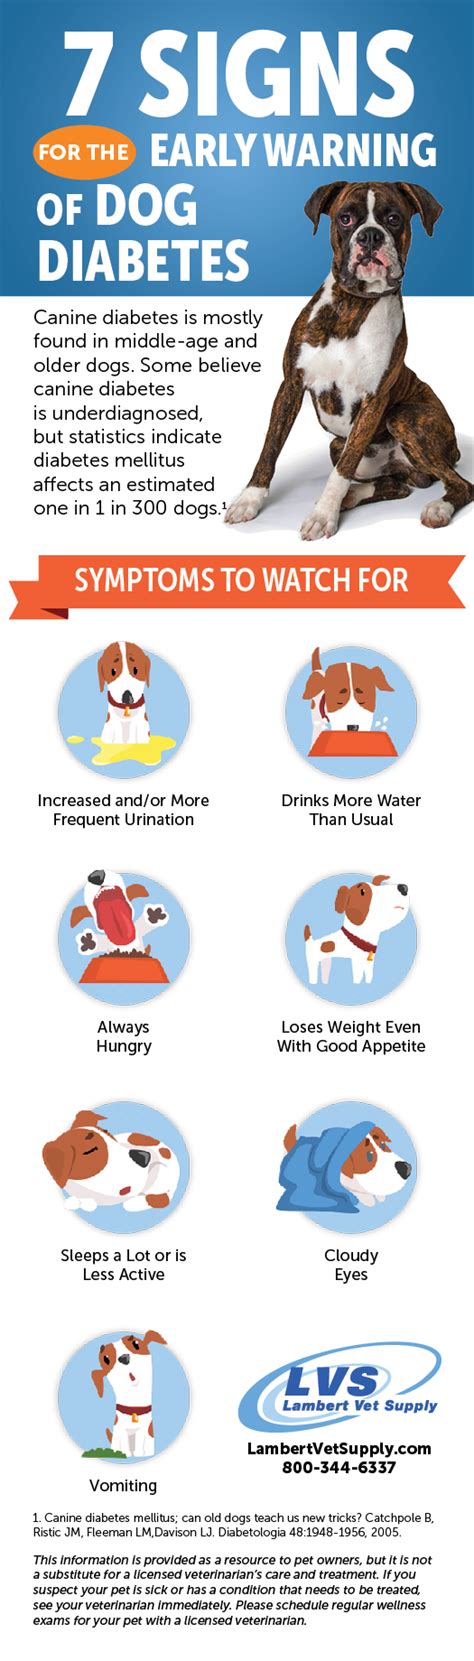  What happens if diabetes is left untreated in dogs? If diabetes is left untreated in dogs, it can have serious and potentially fatal consequences